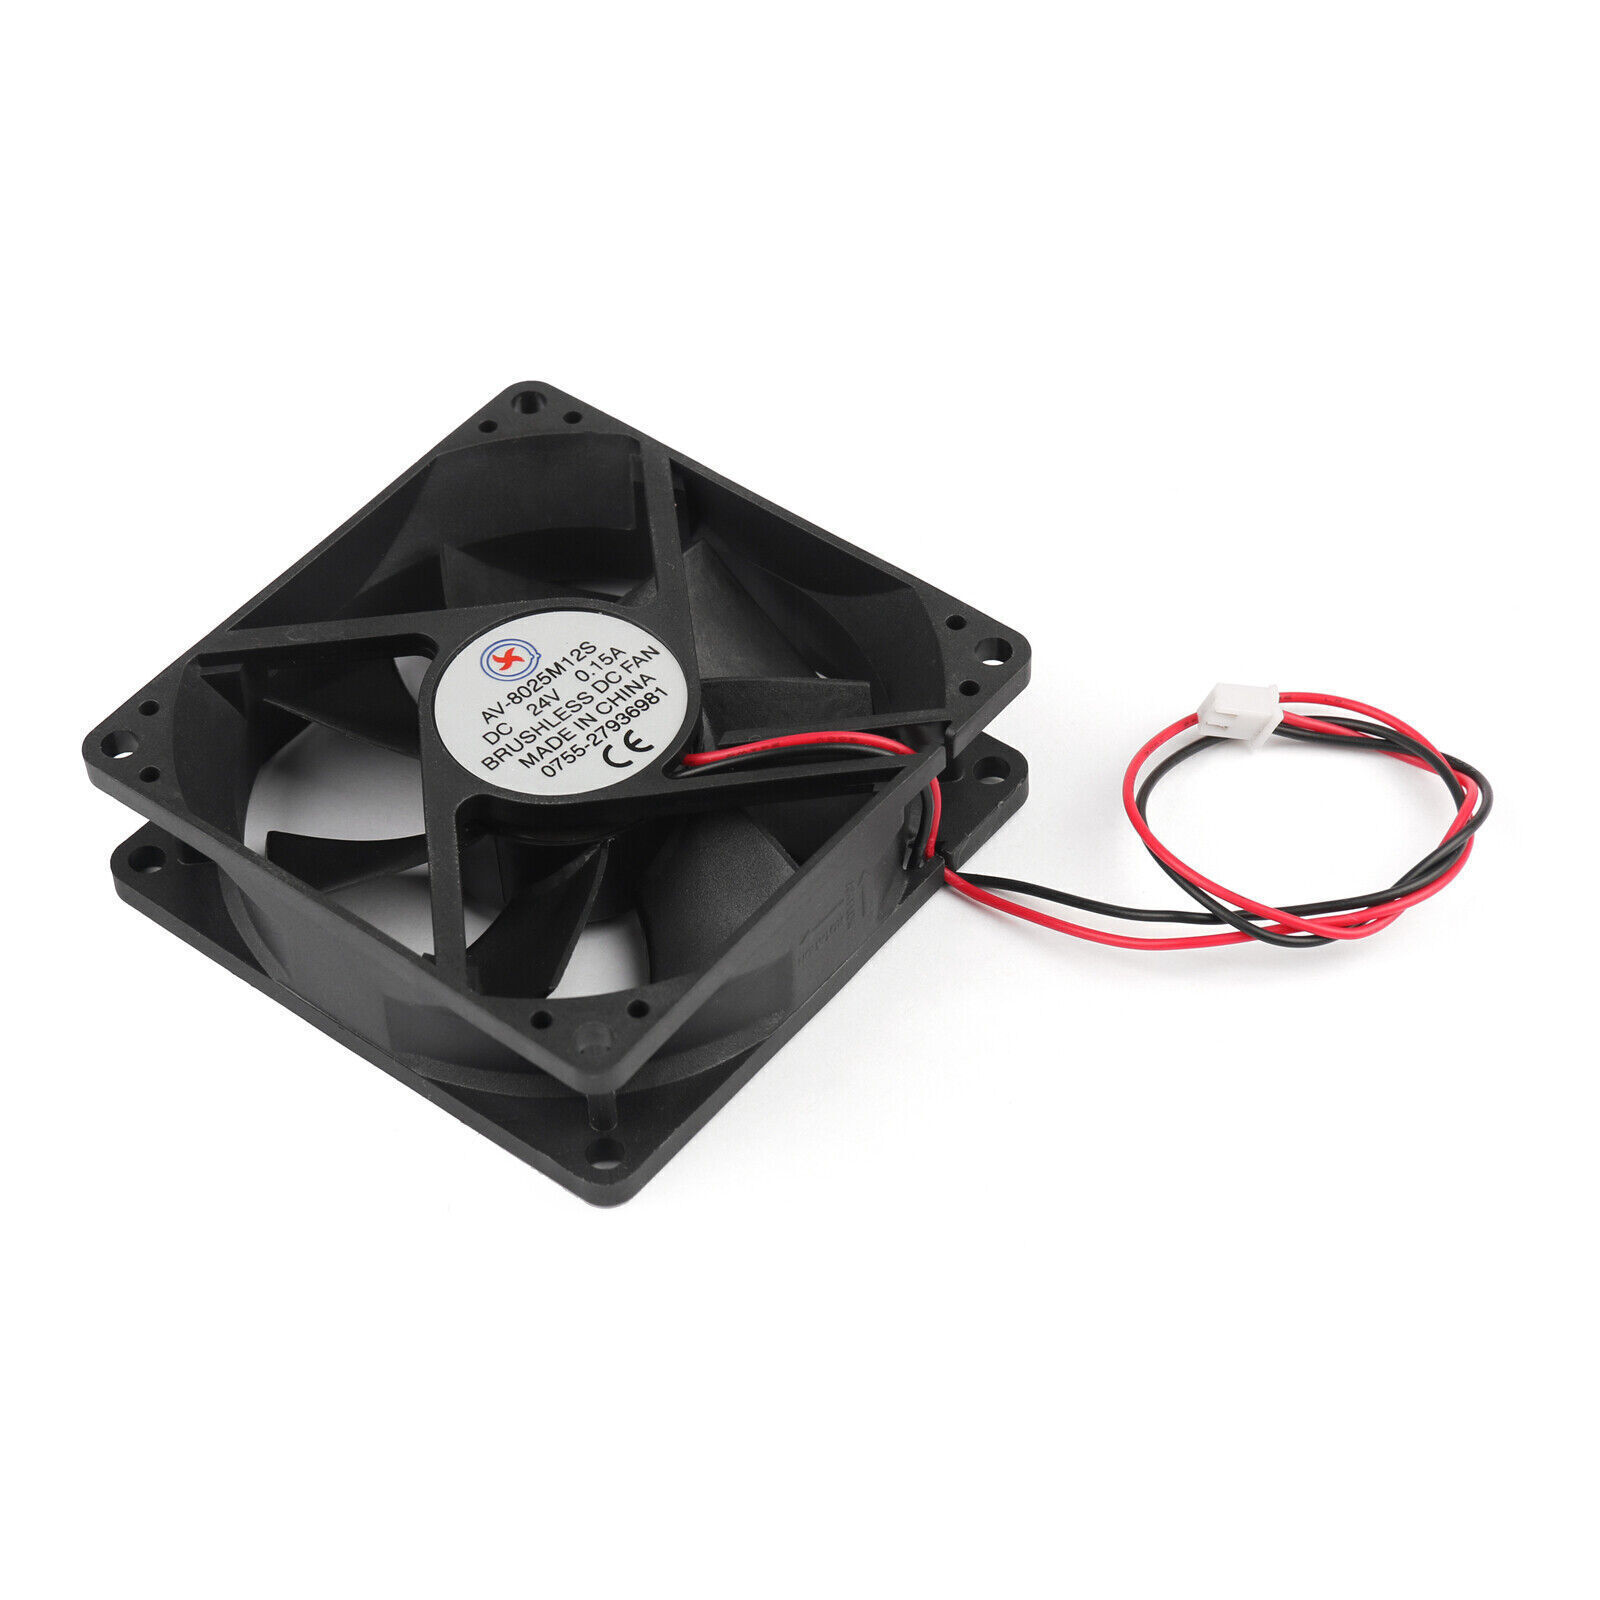 4X DC Brushless Cooling PC Computer Fan 24V 8025s 80x80x25mm 0.15A 2 Pin Wire YU